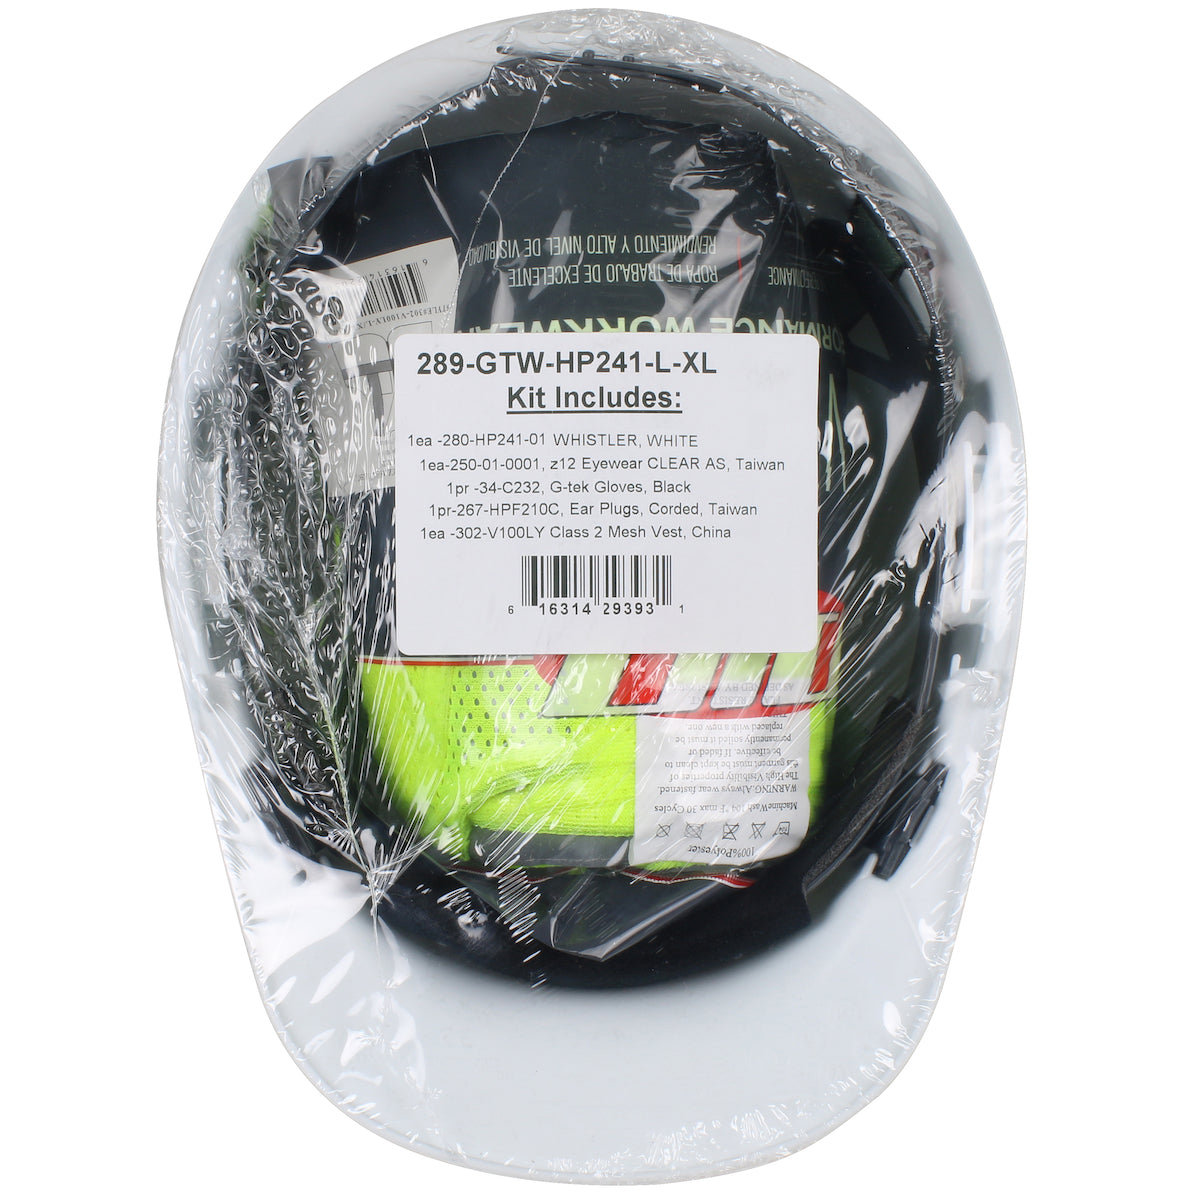 PIP 289-GTW-HP241-L/XL Pre-Packed PPE Kit, HP241 Hat, Safety Eyewear, Earplugs, Gloves and Vest